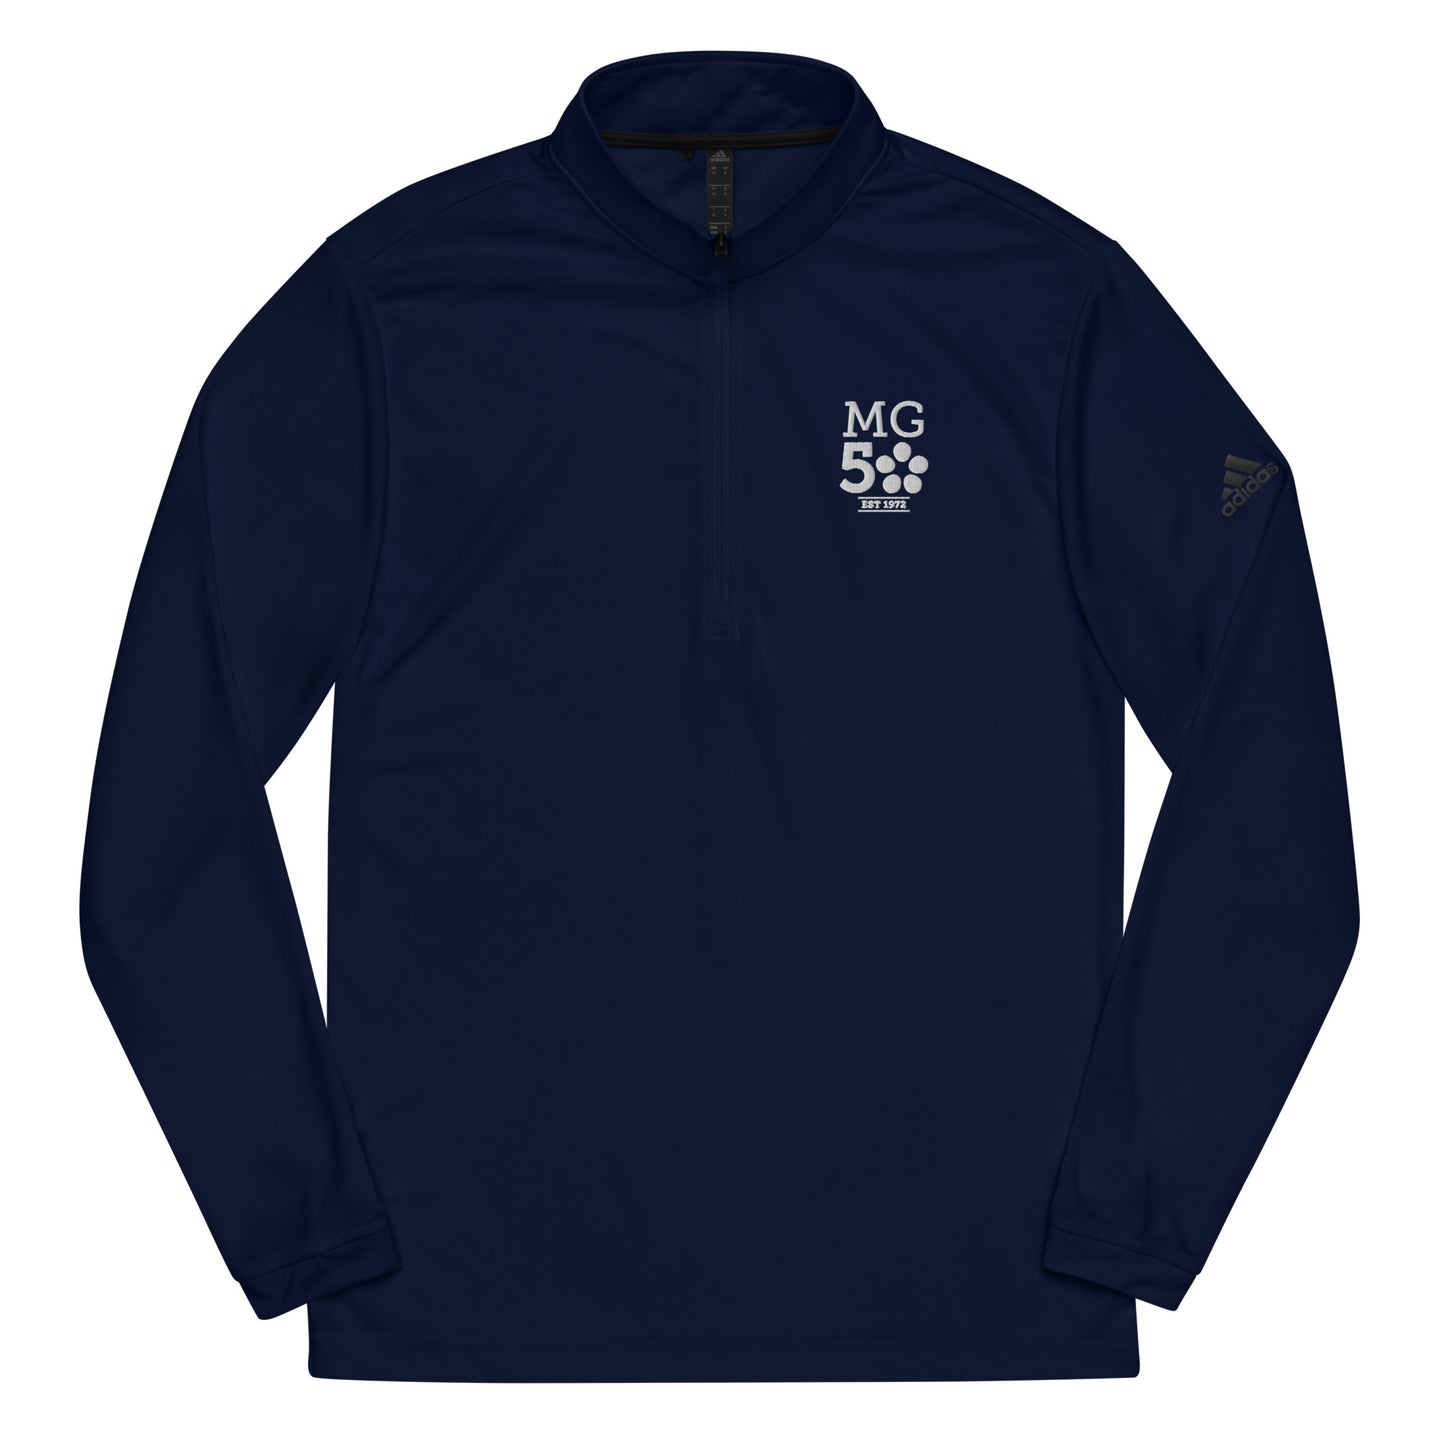 Mission Graduates Quarter Zip Pullover, Favicon Logo Front Chest with Full Logo Print on Reverse